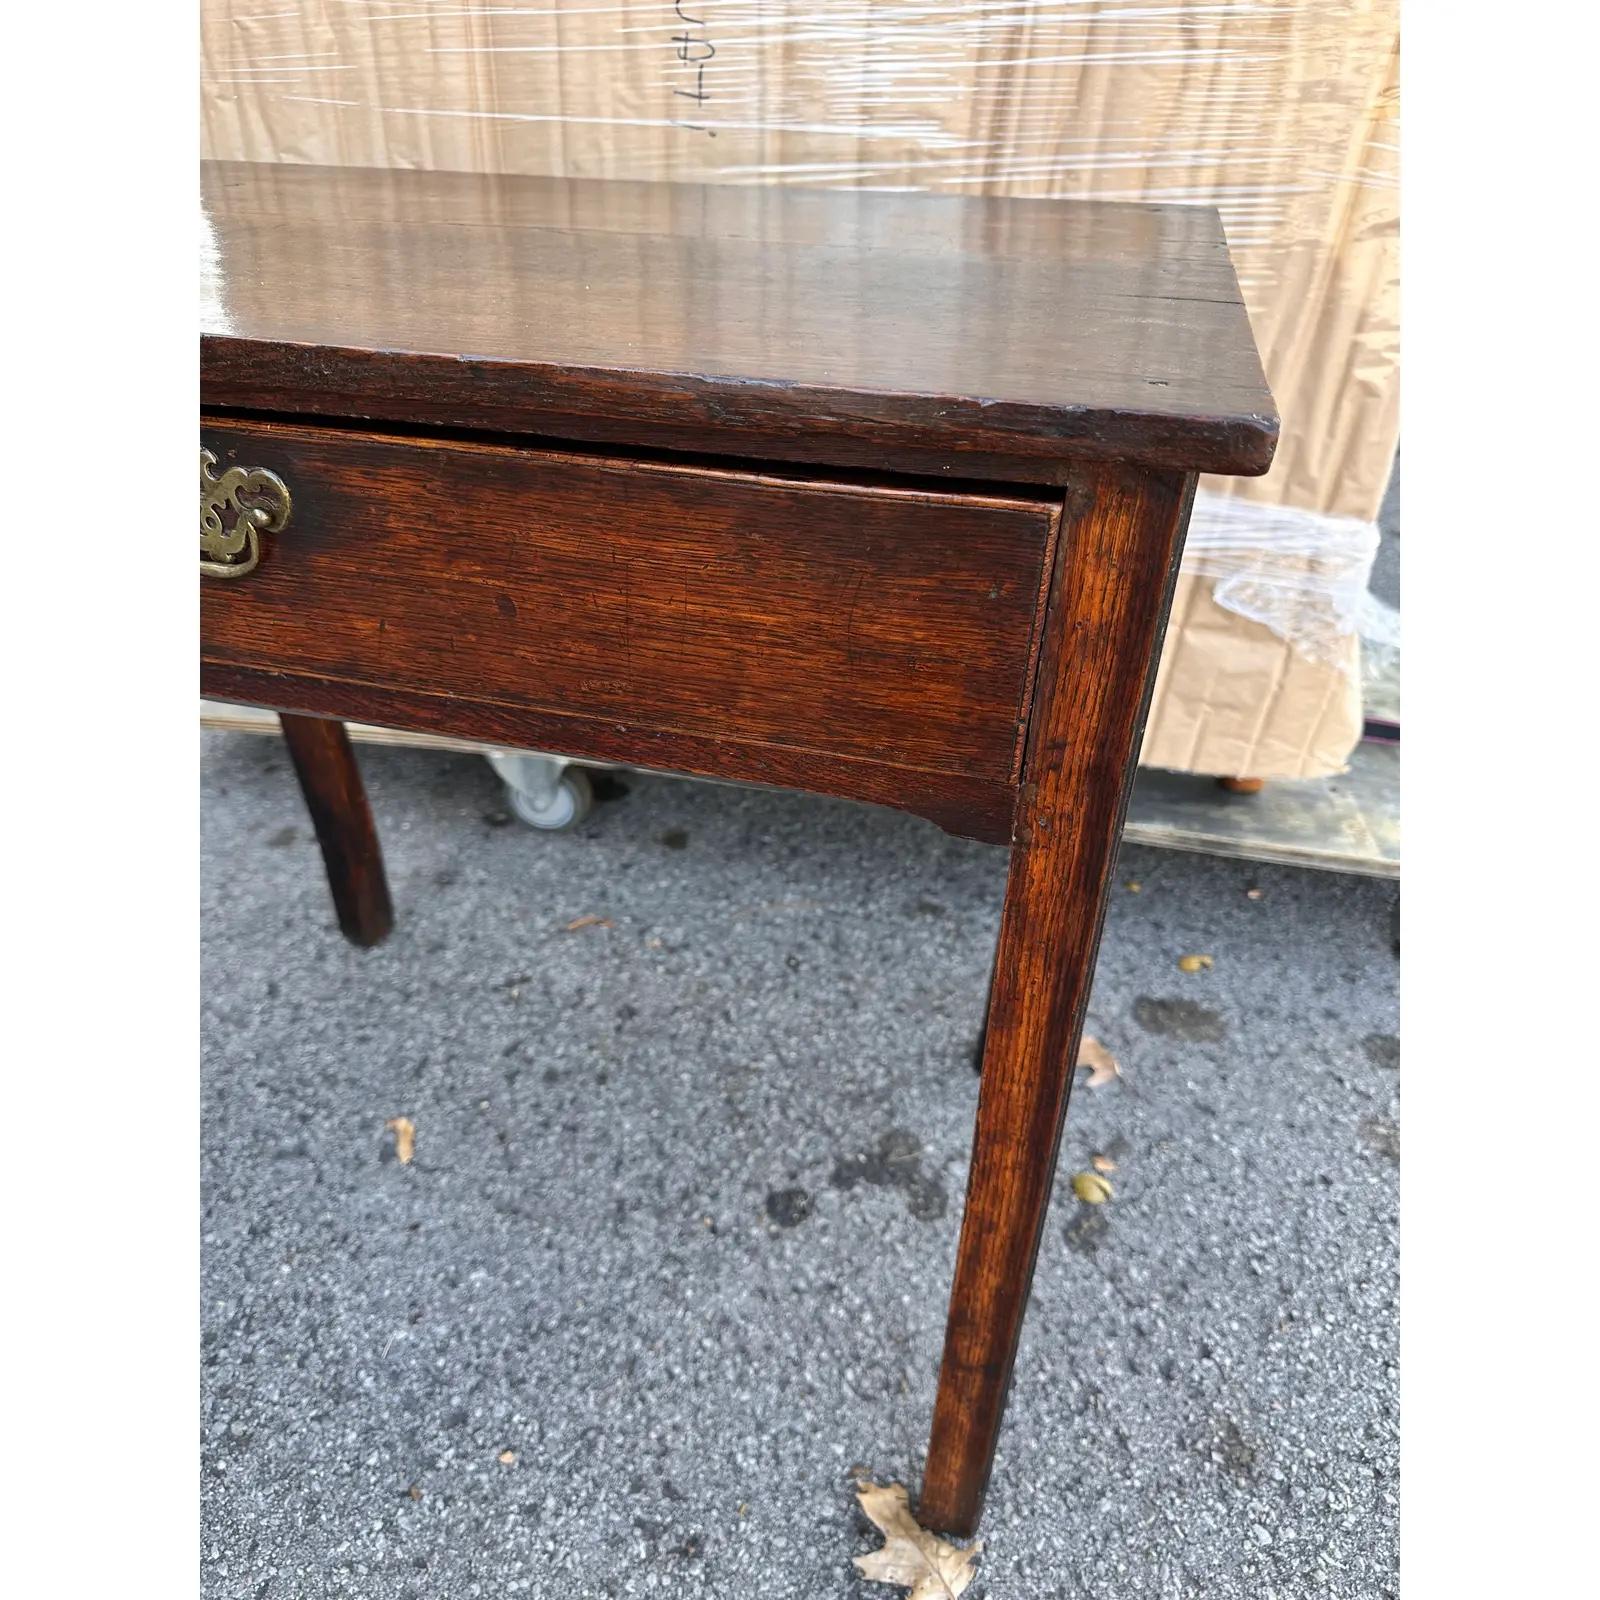 This is a beautiful English side table! The color and patina of this piece is amazing! This side table is sturdy and mature and features a single sliding drawer for function. This piece is excellent way to add history and character to any home. #653